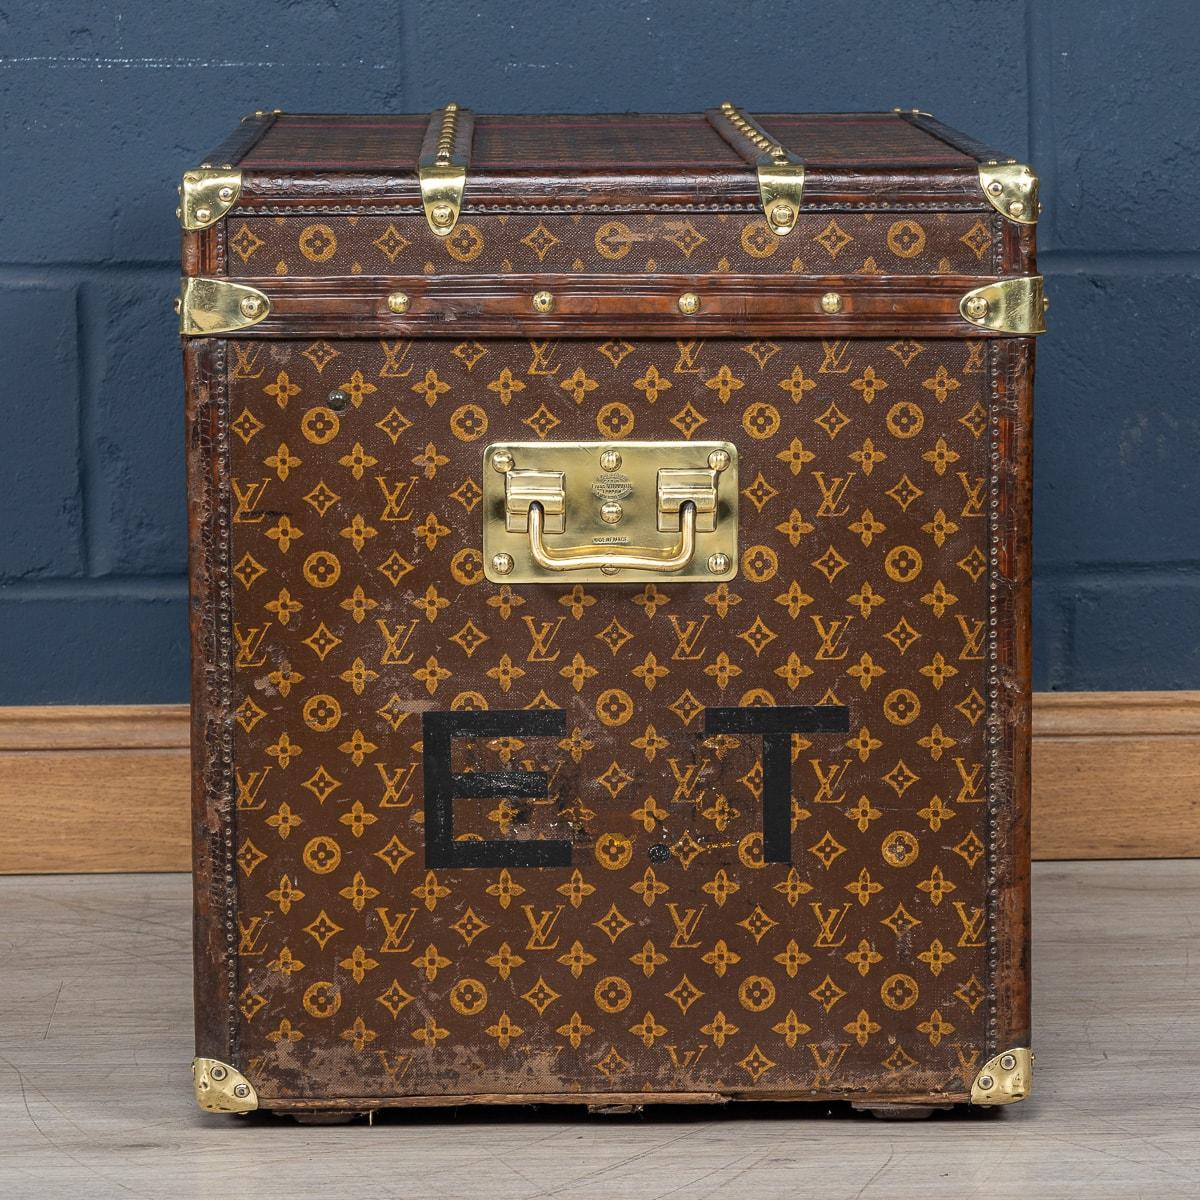 Antique 20th Century Louis Vuitton Hat Trunk In Monogram Canvas, France c.1910 In Good Condition For Sale In Royal Tunbridge Wells, Kent